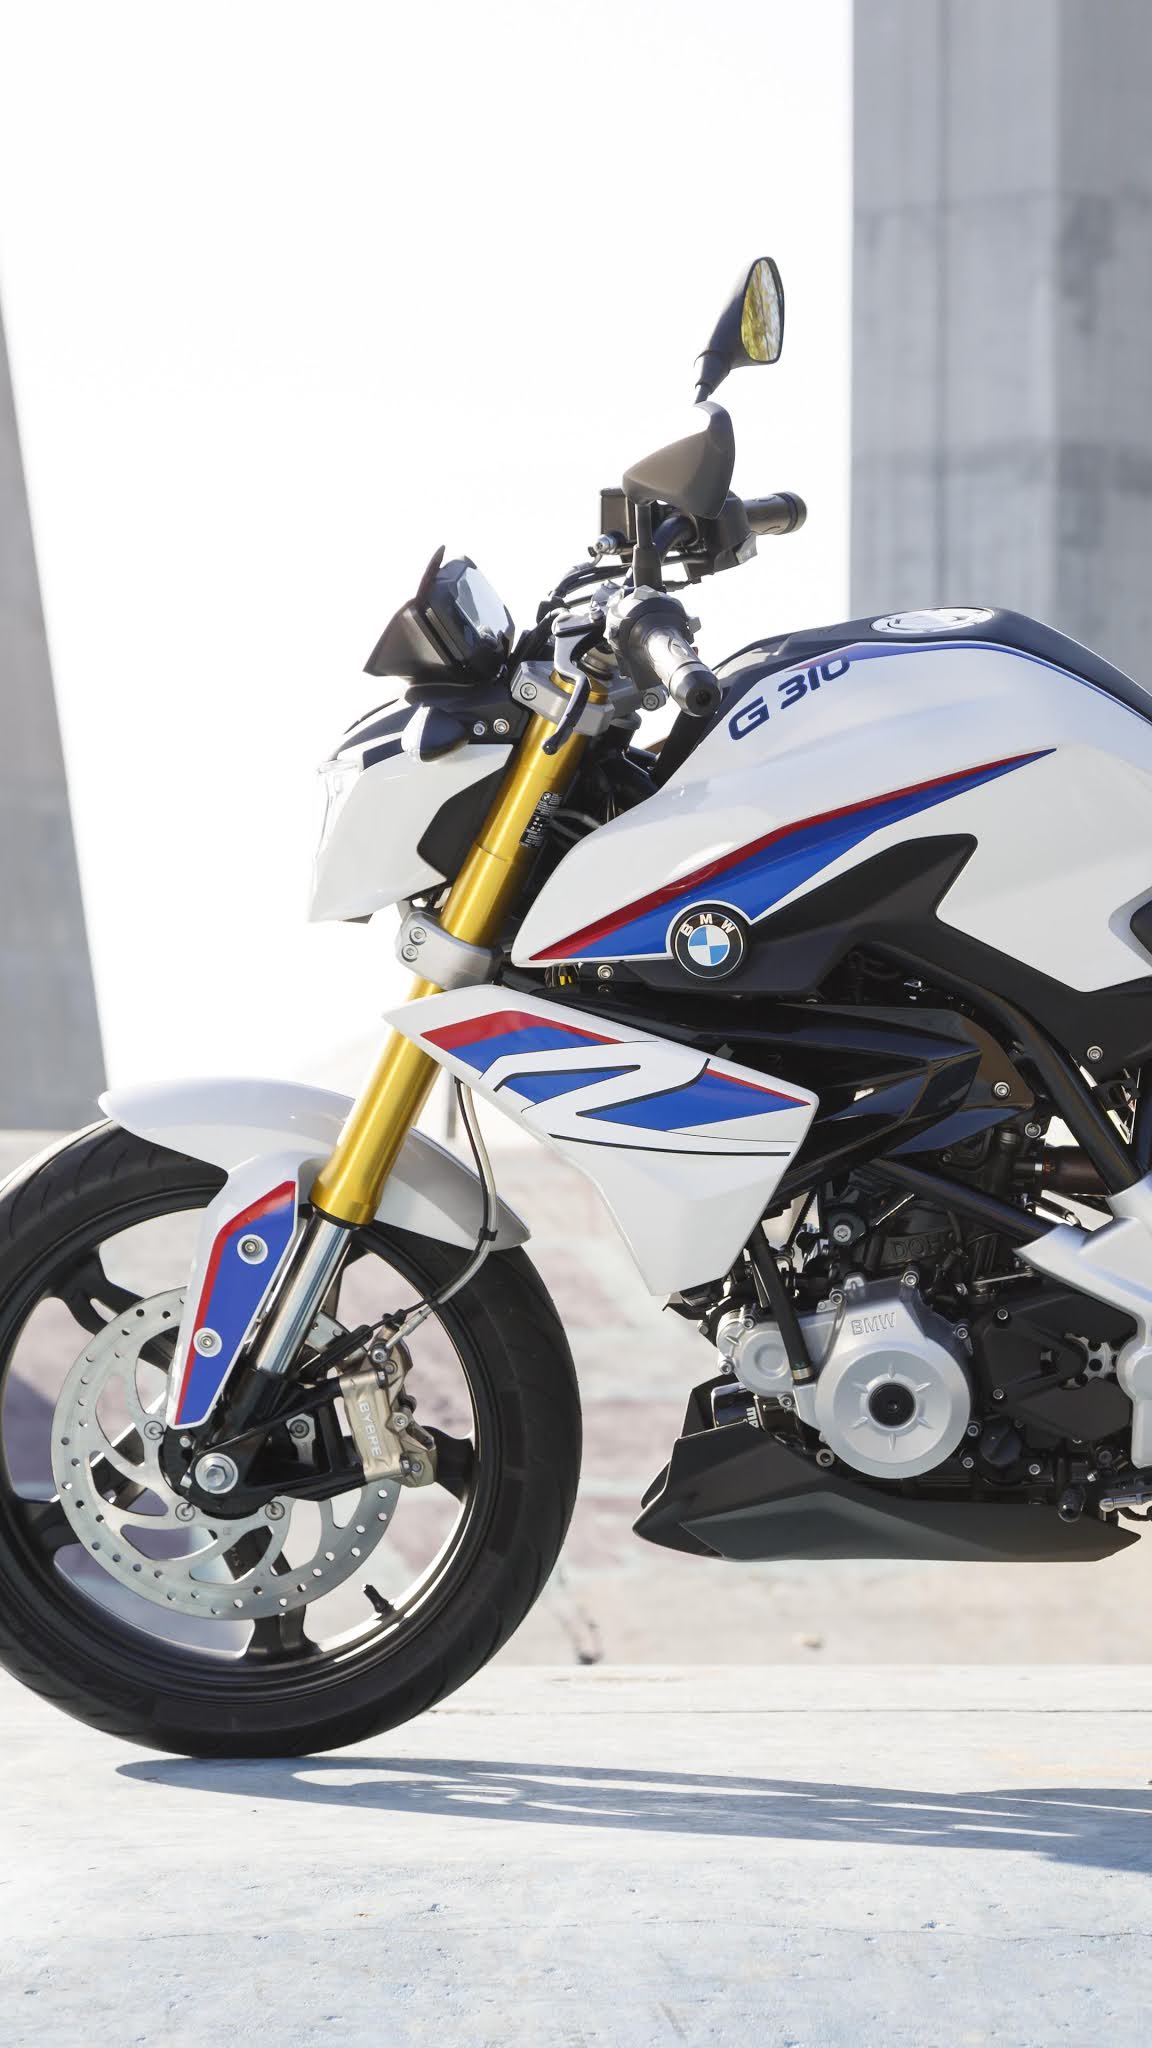 Bmw G 310 R Price In India Mileage Specifications Colors Top Speed And Servicing Periods